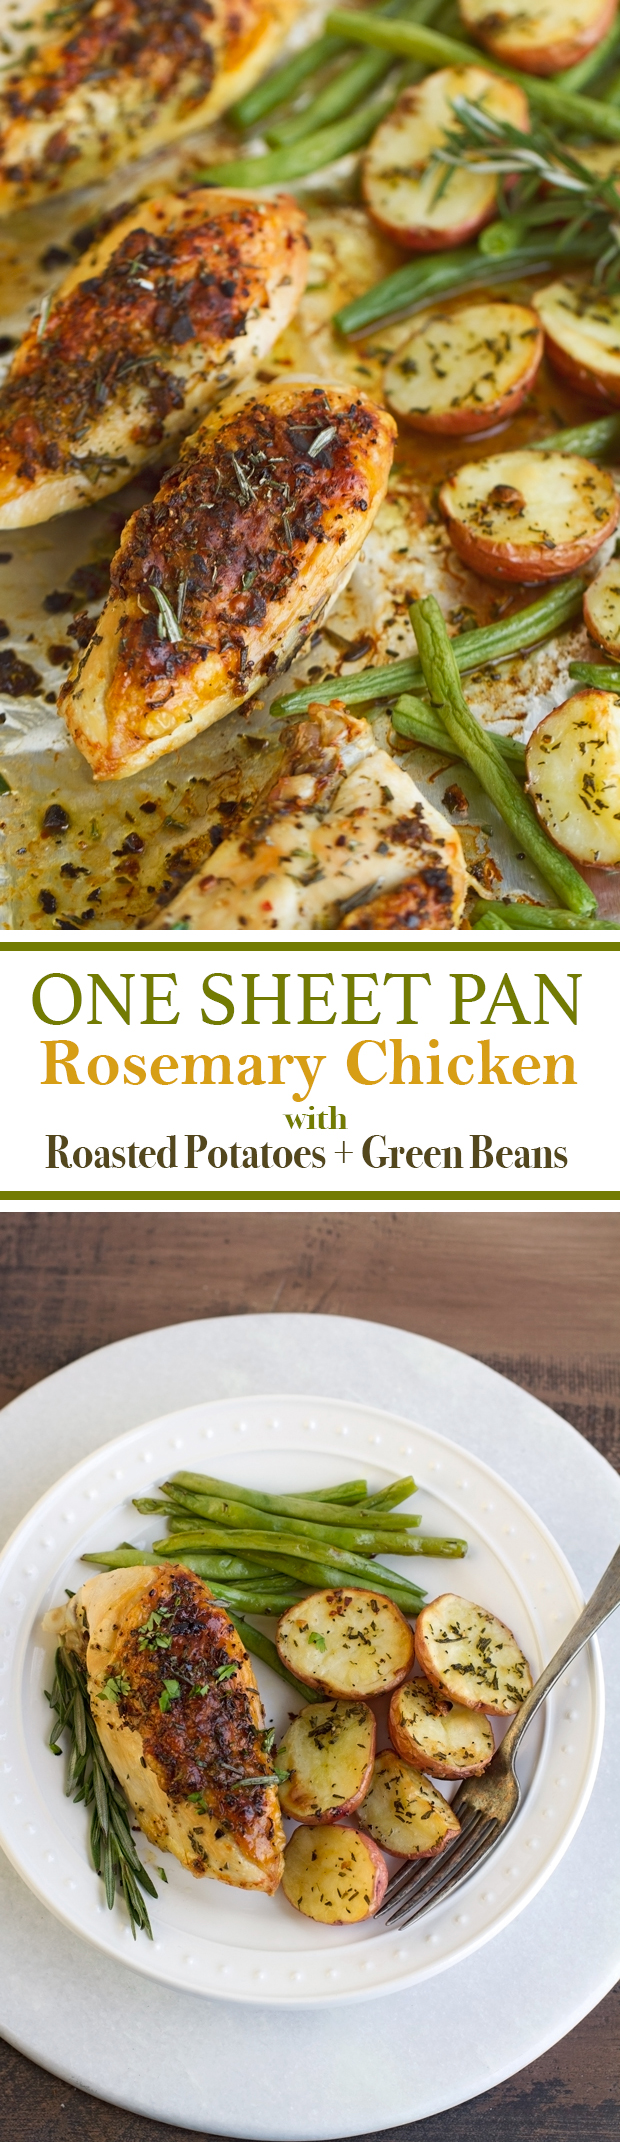 One Sheet Pan Rosemary Chicken + Potatoes & Green Beans - ALL cooked on one sheet pan and ready in under an hour! #roastedchicken #rosemarychicken #roastedpotatoes #onepandinner | Littlespicejar.com